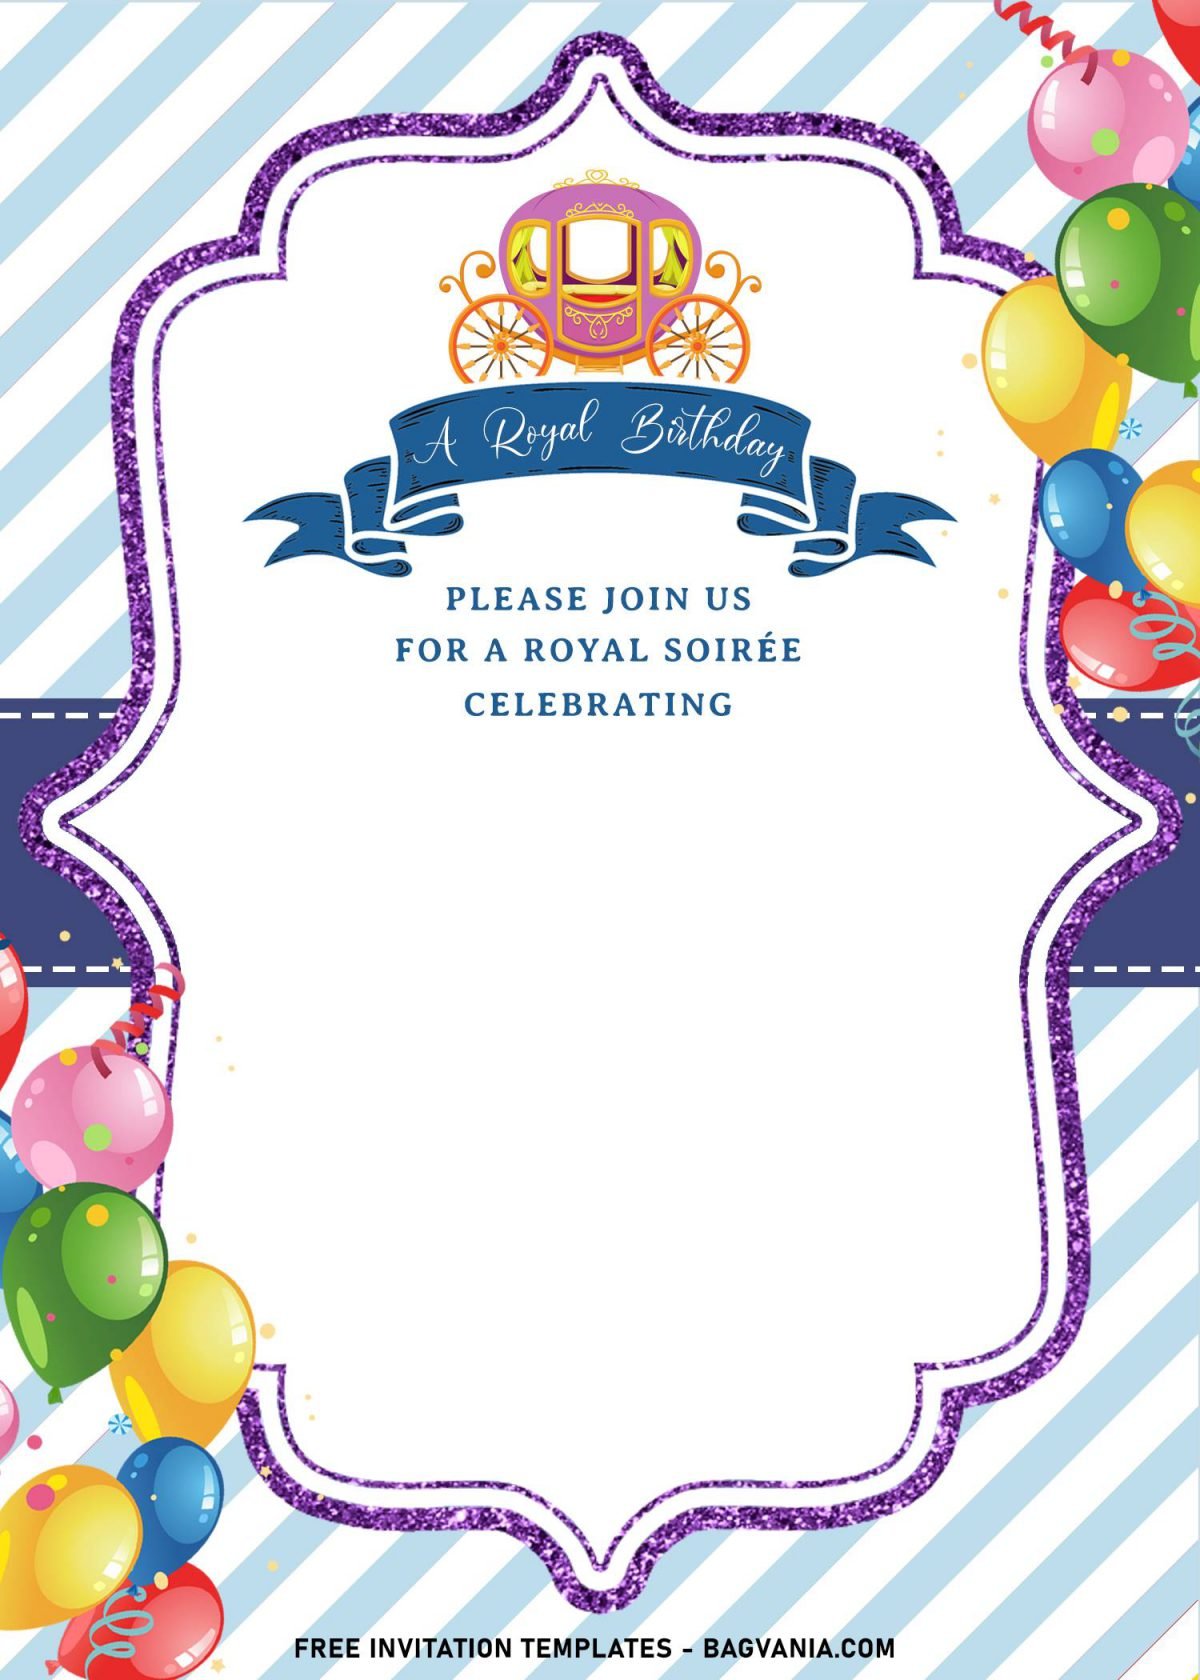 8+ Royal Birthday Invitation Templates For Your Kids Upcoming Birthday Party and has Blue Glitter Bracket Frame